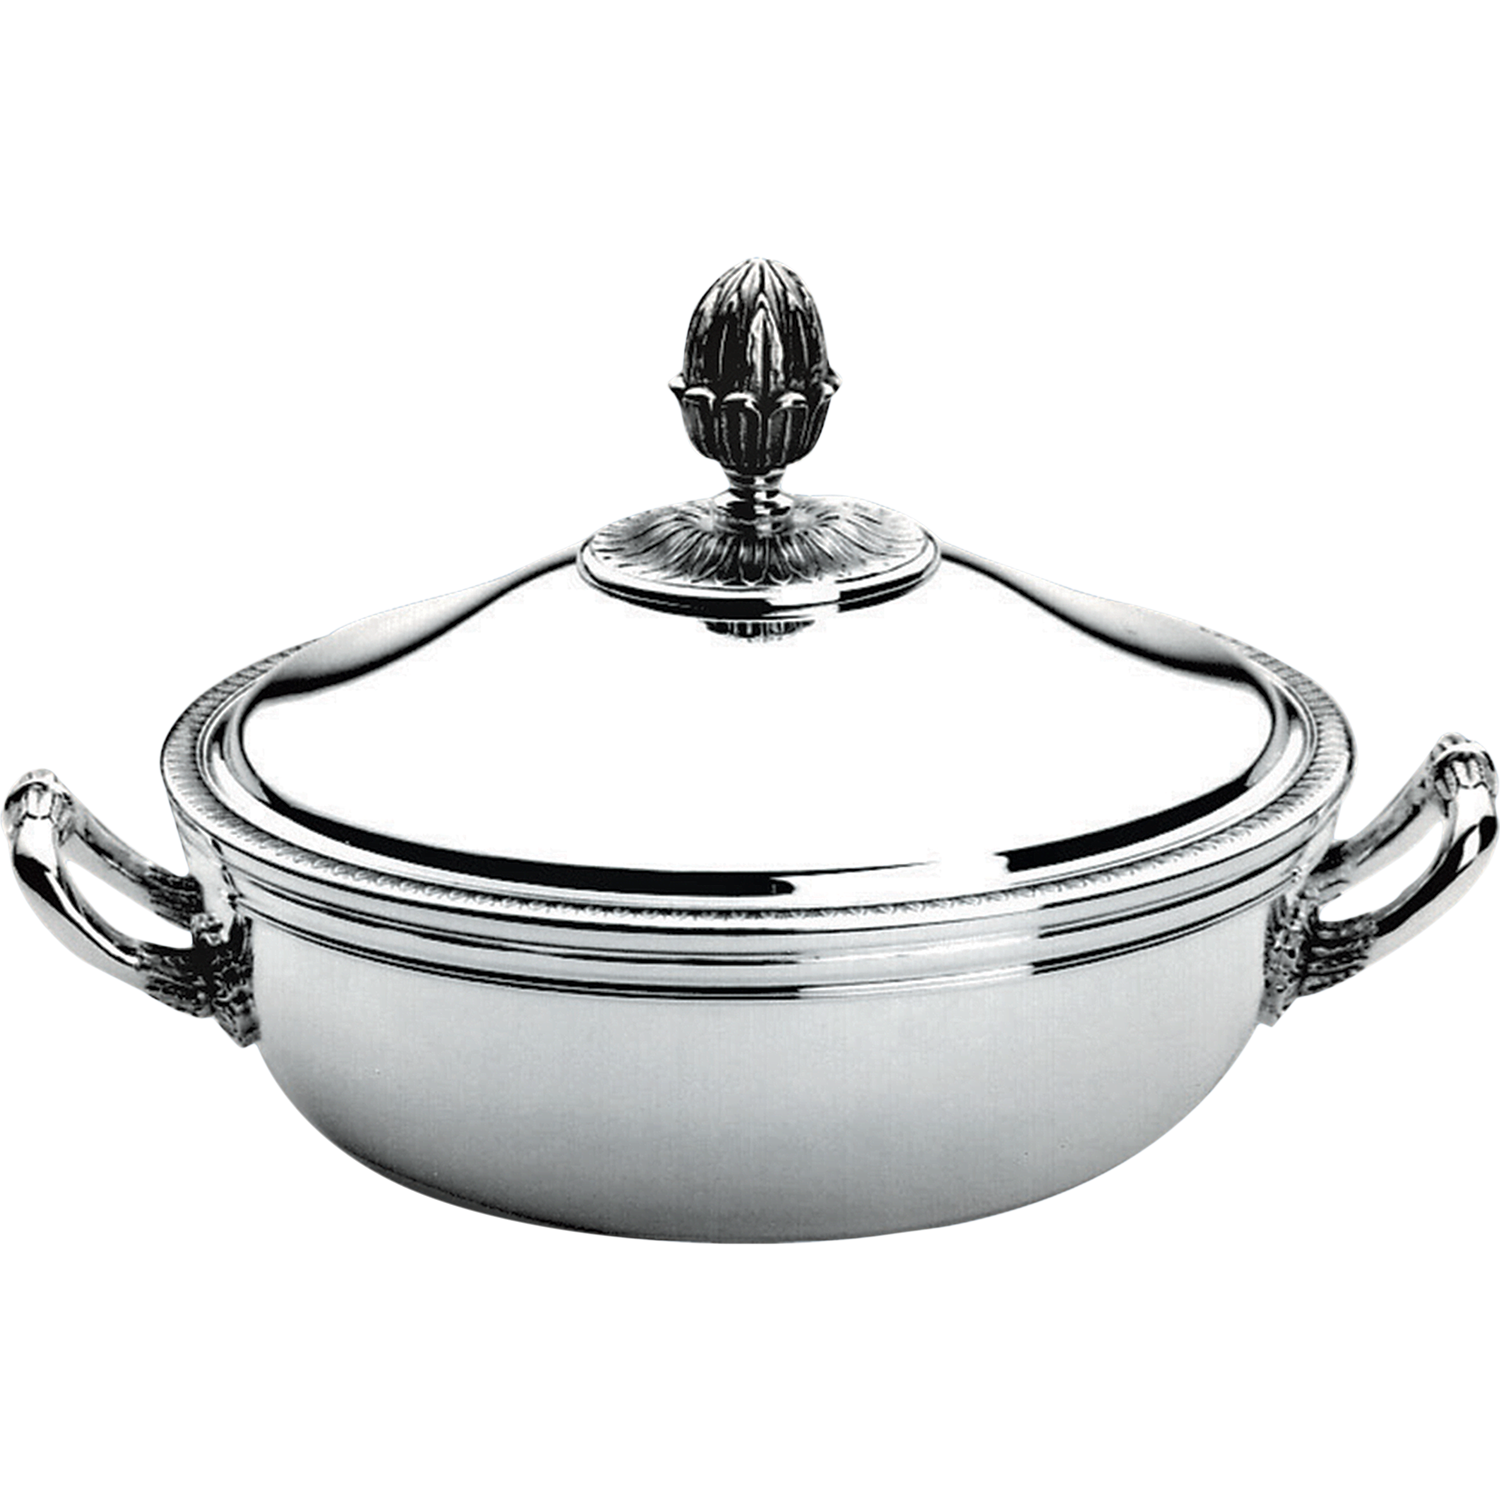 Silver-Plated vegetable dish with lid